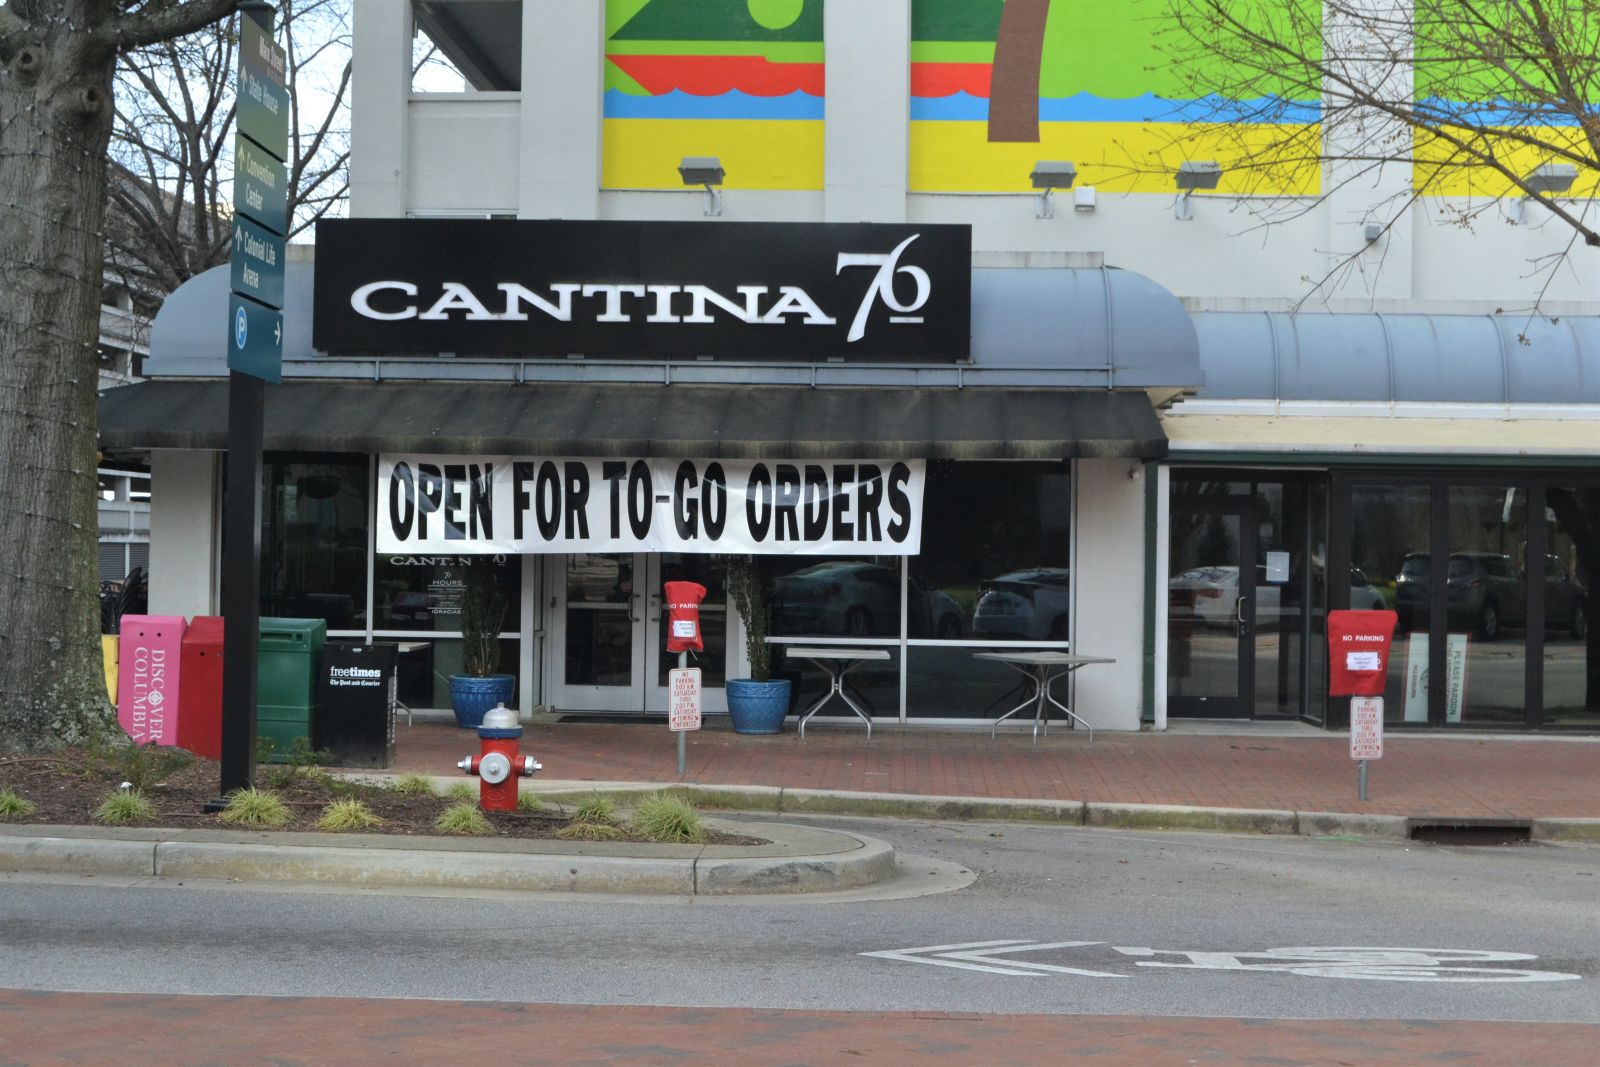 Cantina 76, which has five S.C. locations including one on Main Street in downtown Columbia, is trying to ramp up its curbside pickup and to-go business after restaurant dining rooms throughout the state were ordered closed Tuesday. (Photo/Melinda Waldrop)